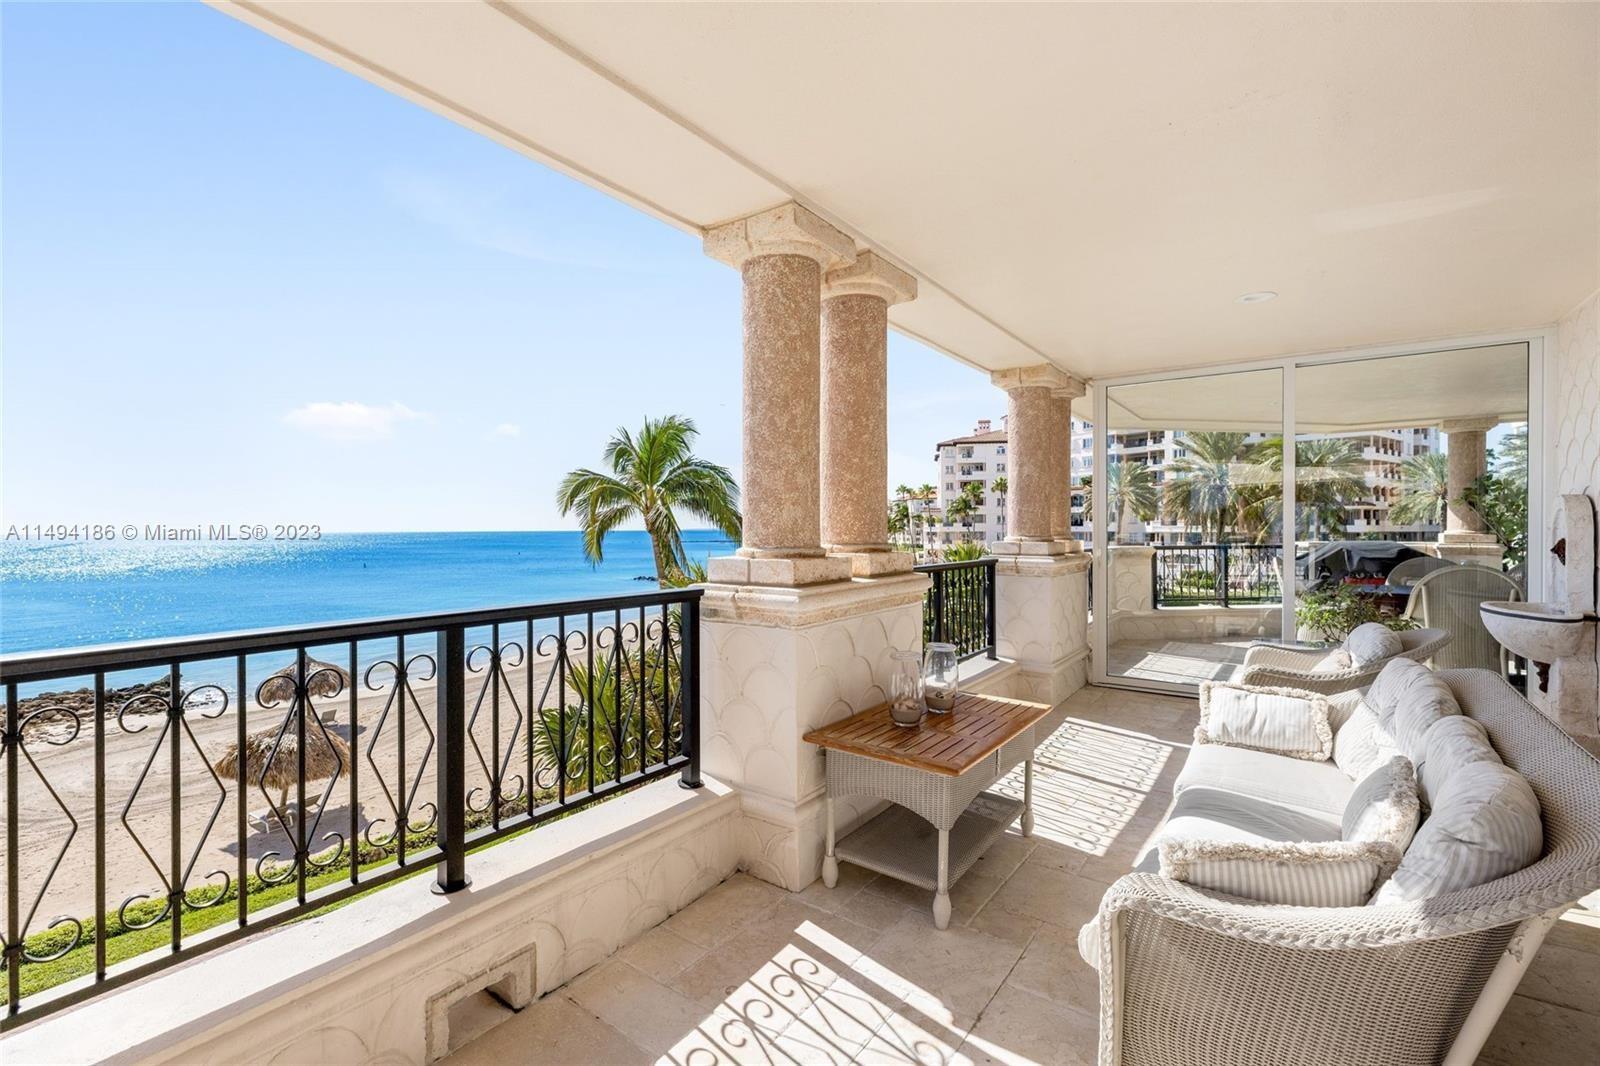 Property Image for 7424 Fisher Island Dr 7424